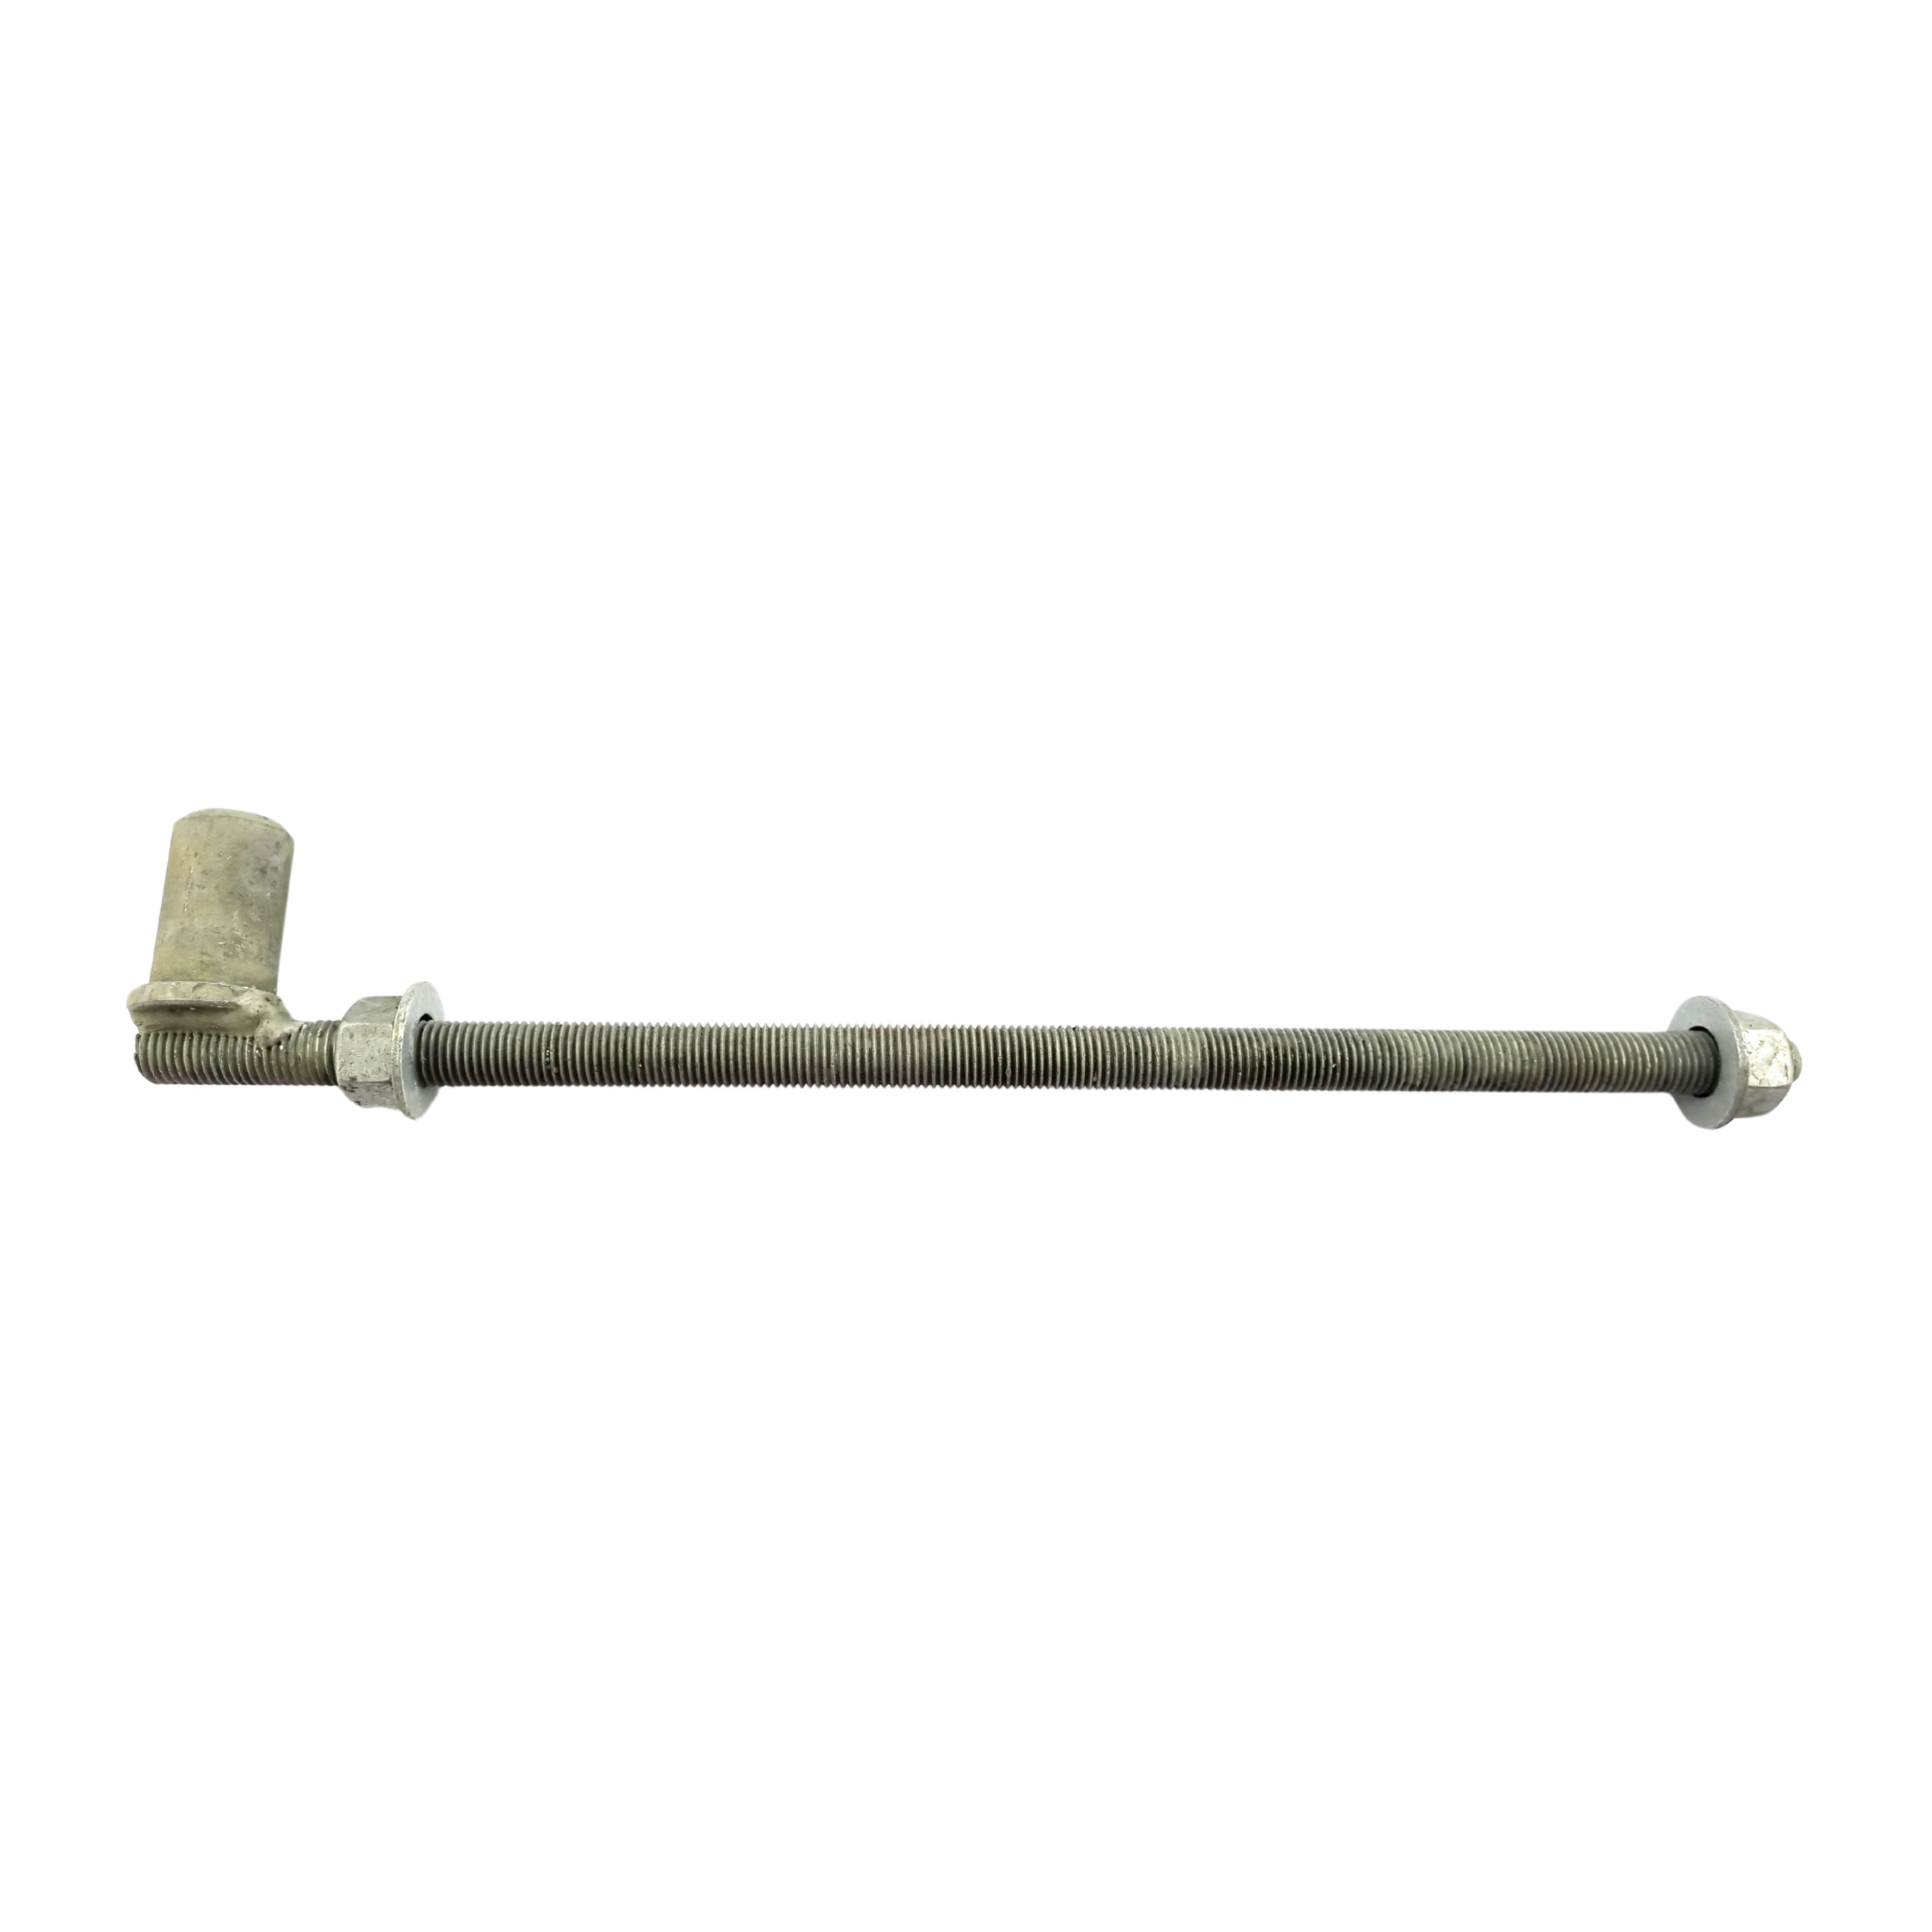 Timber Post - Bolt Thru - Type C - Galvanised. Australian Made. Fence & Gate Fittings. Shop online chain.com.au. Australia wide shipping.